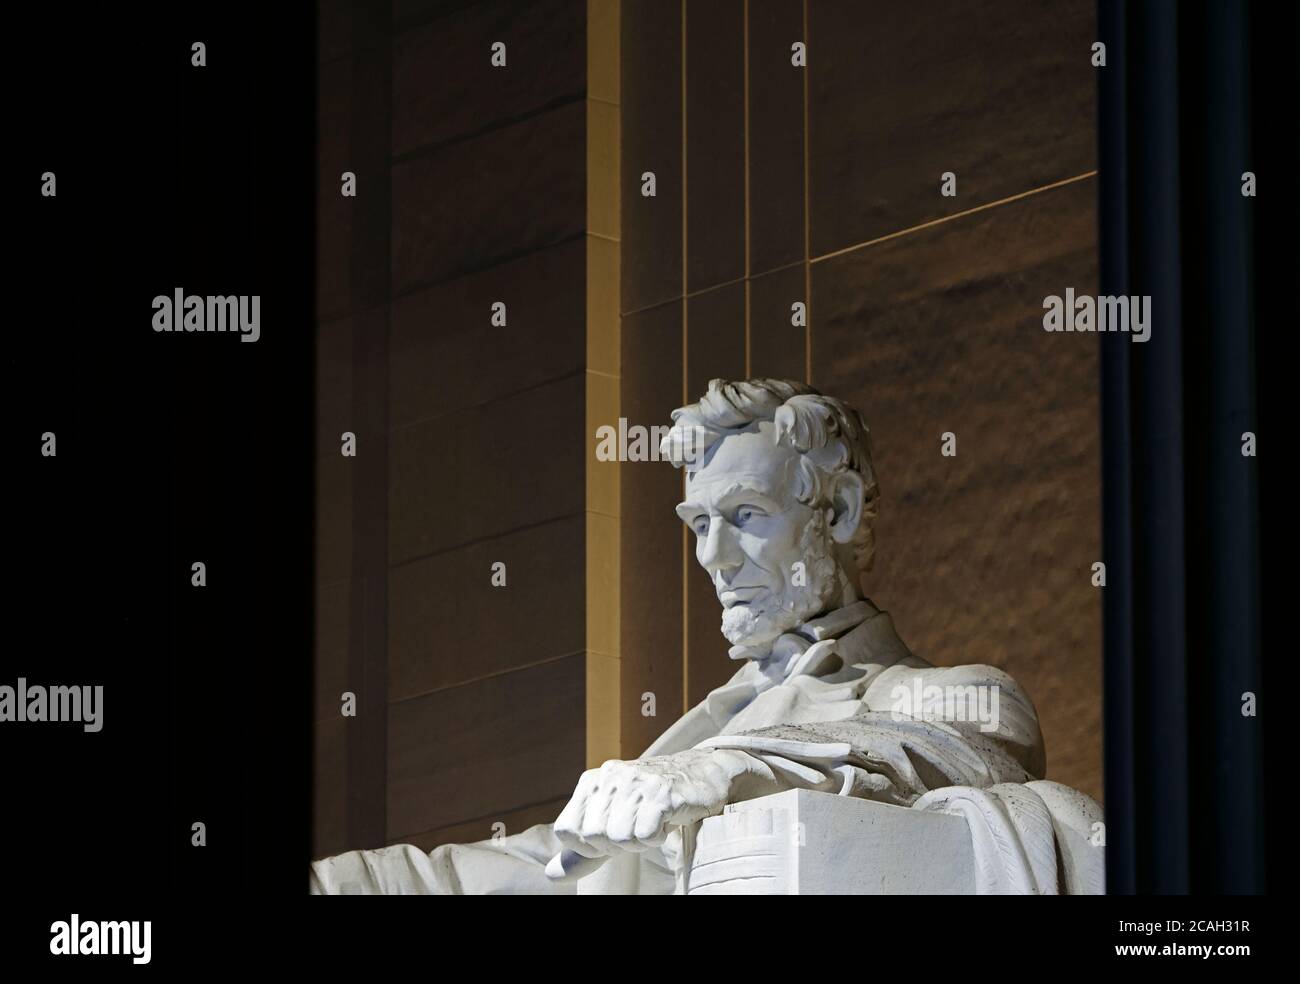 Close up of the statue of Abraham Lincoln by sculptor 'Daniel Chester French' in the Lincoln memorial illuminated at night Stock Photo